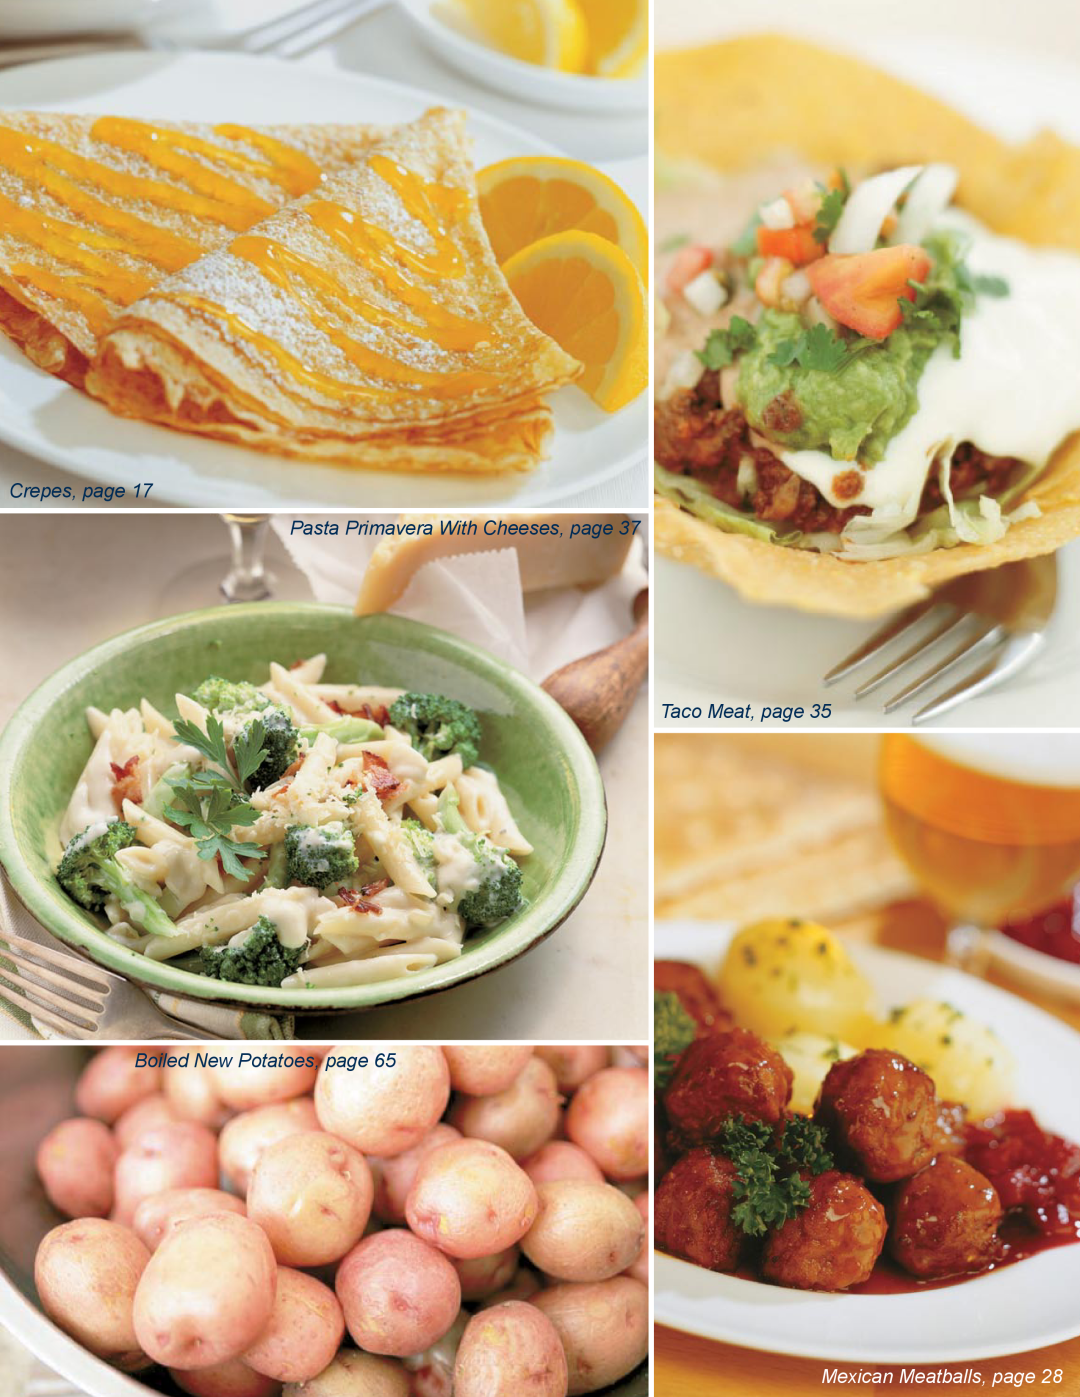 Unified Brands Braising Pan Crepes, page Pasta Primavera With Cheeses, page Taco Meat, page, Boiled New Potatoes, page 